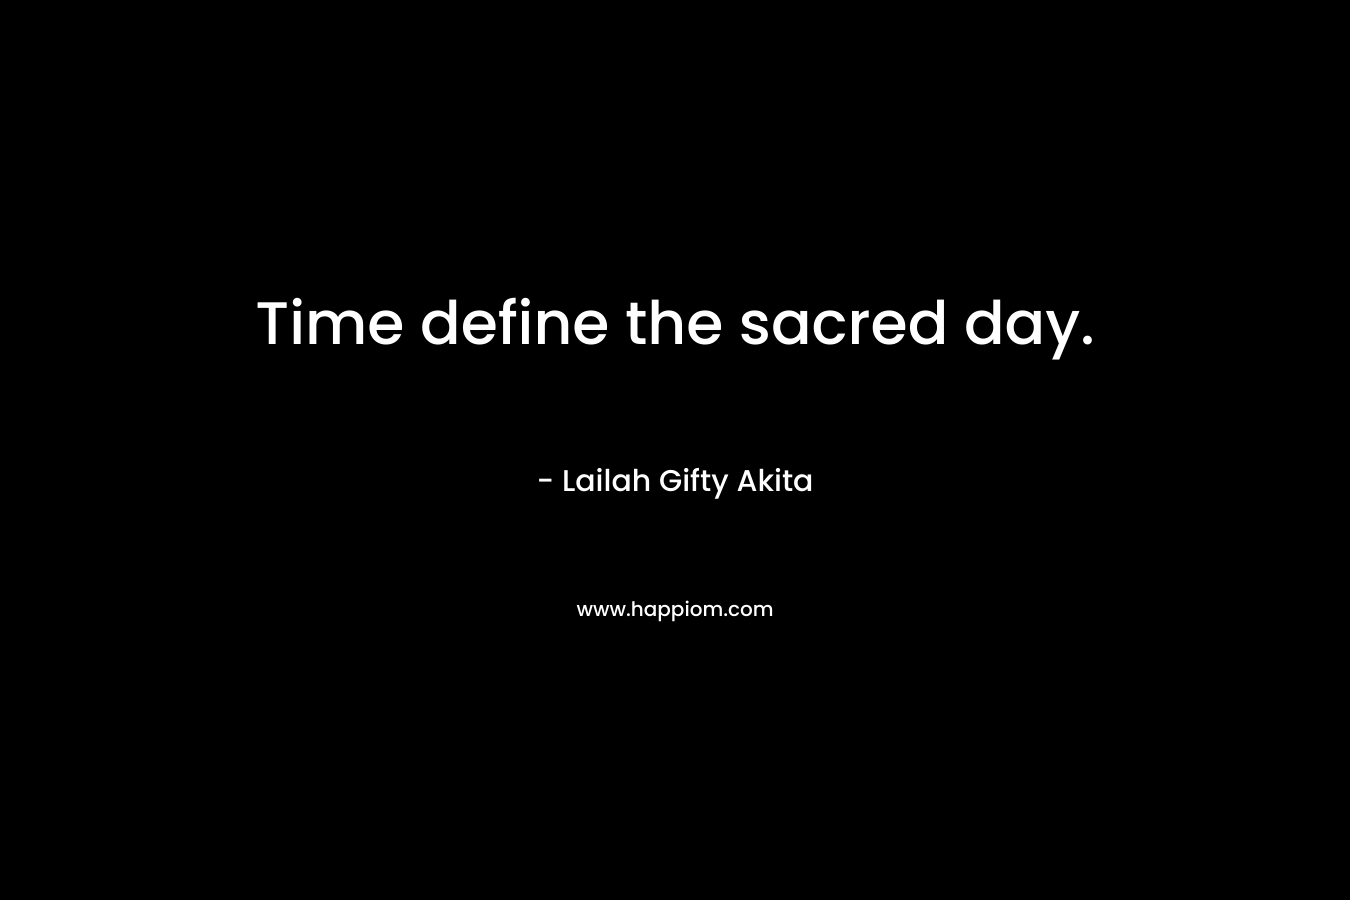 Time define the sacred day.